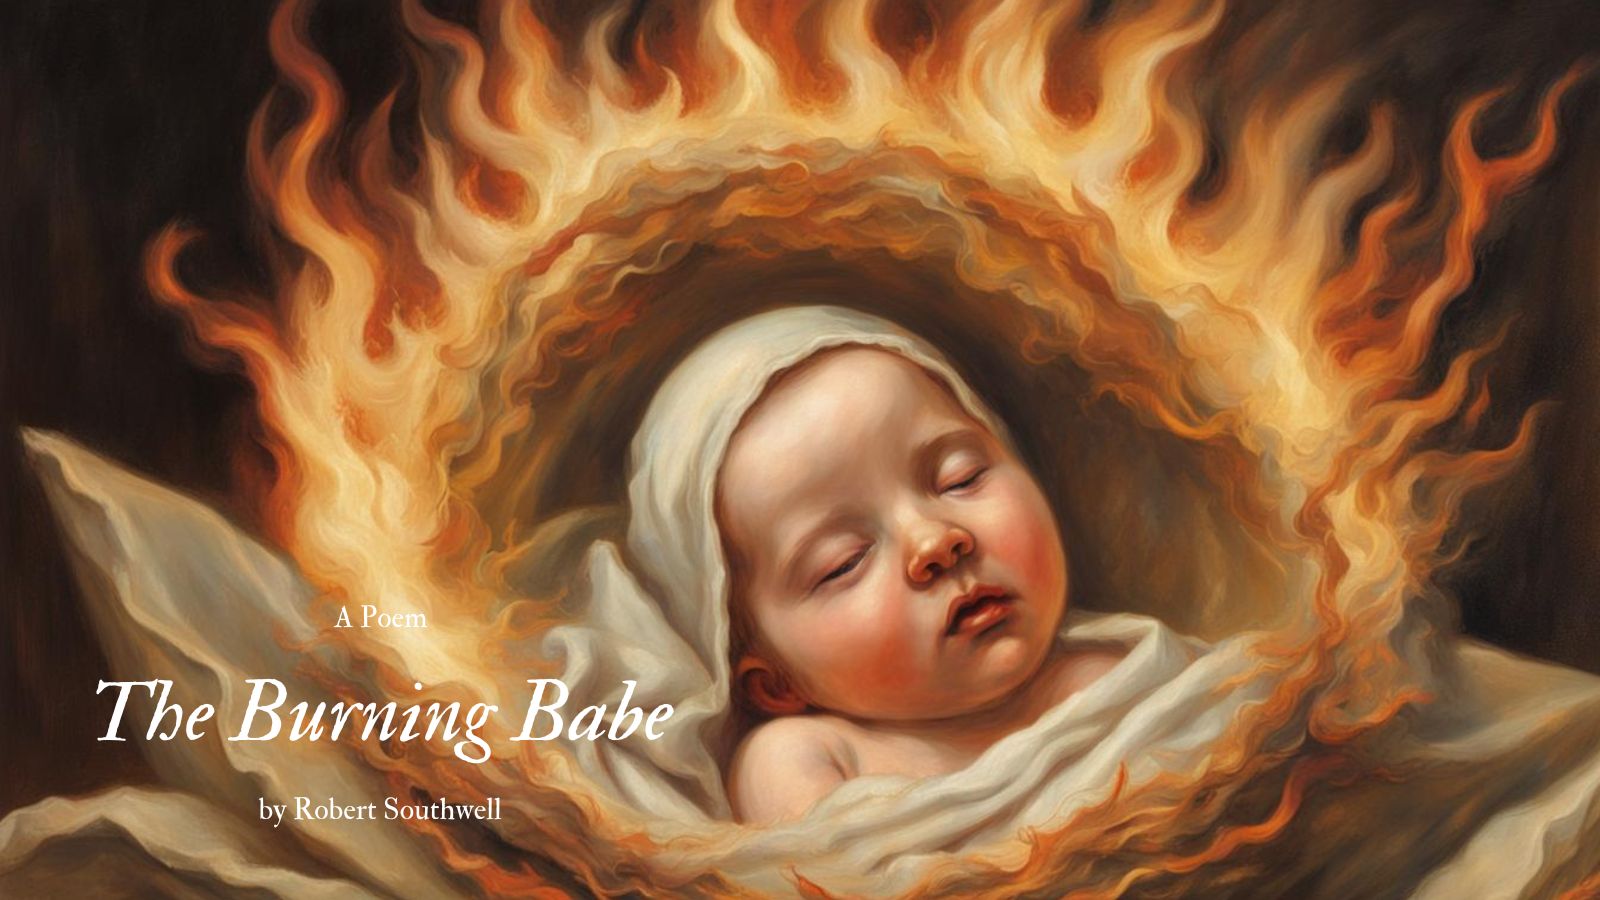 The Burning Babe by Robert Southwell